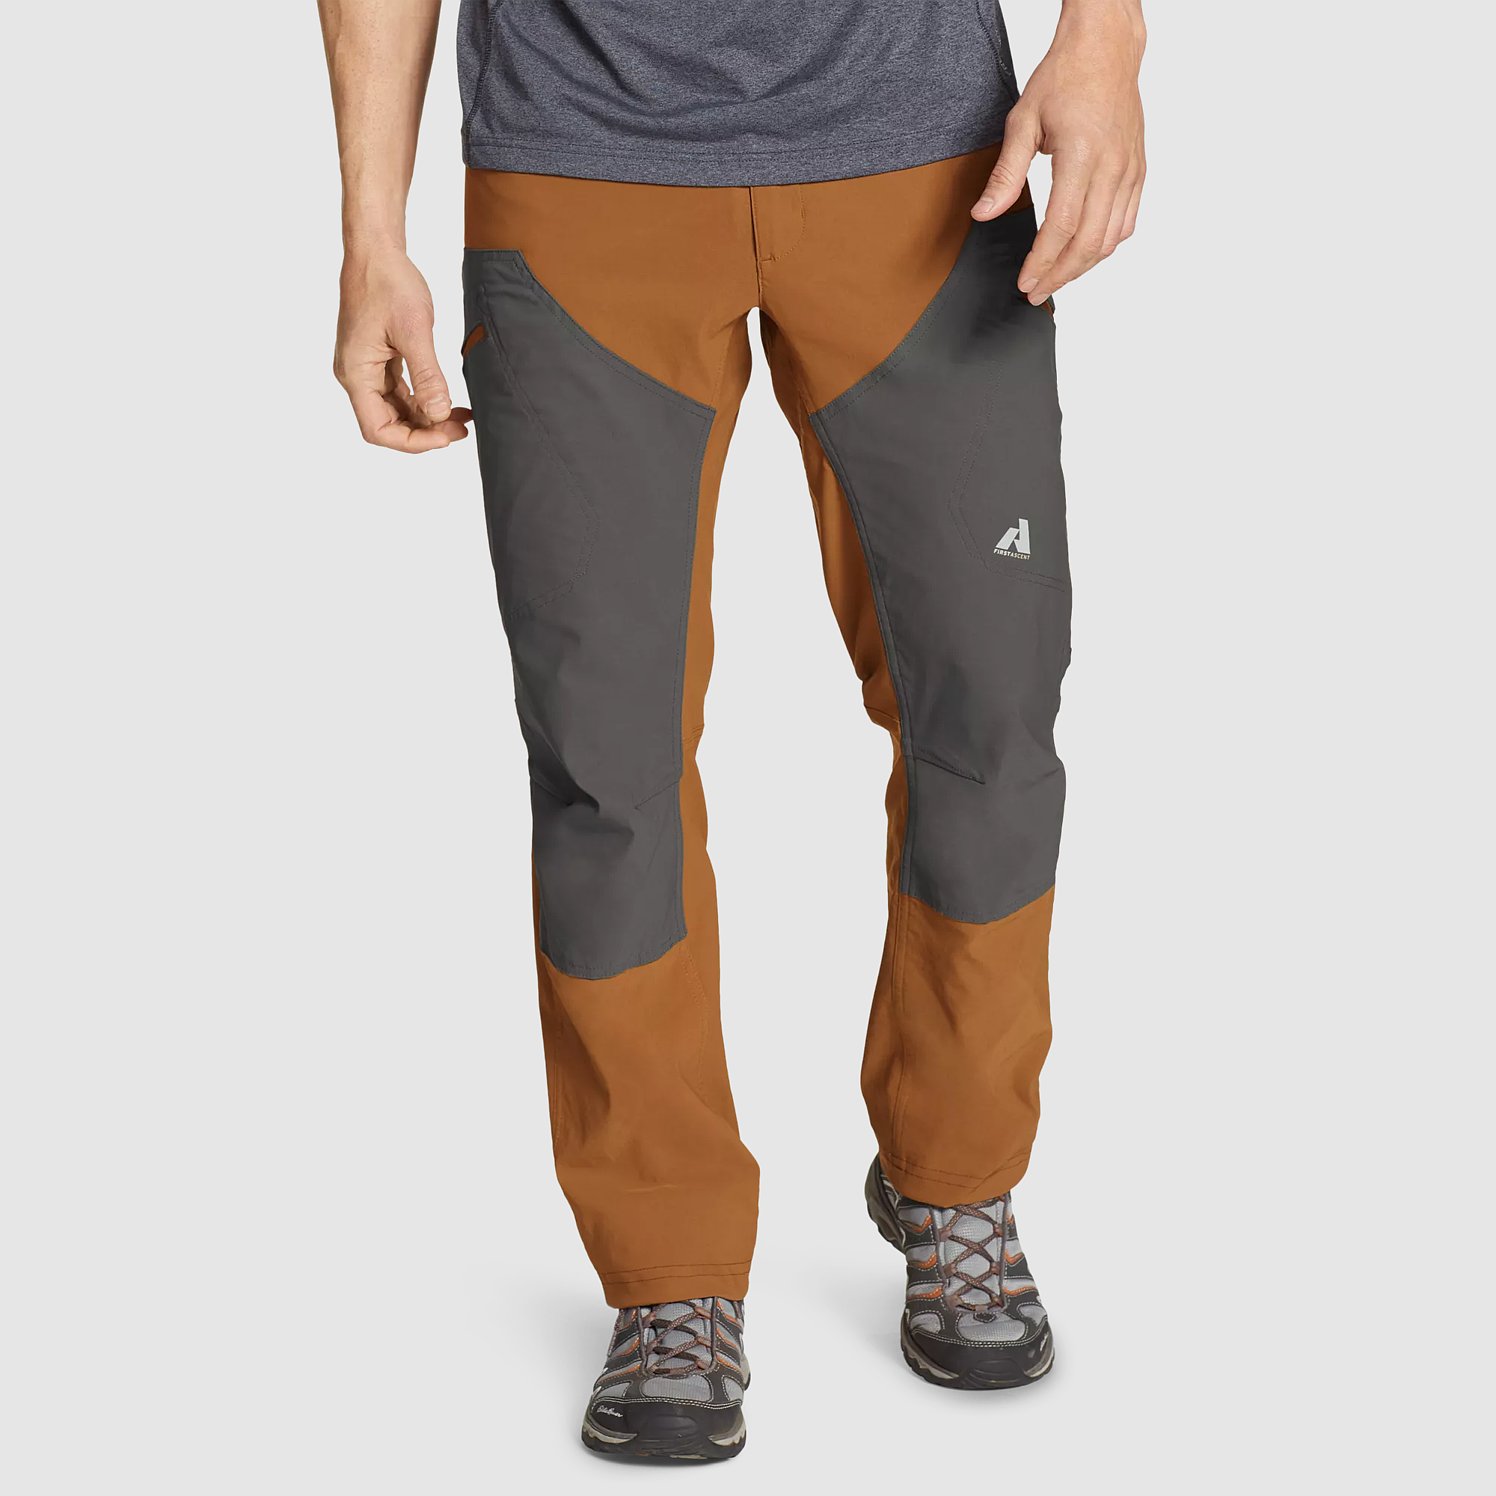 Eddie Bauer Men's Guide Pro Convertible Pants – Search By Inseam